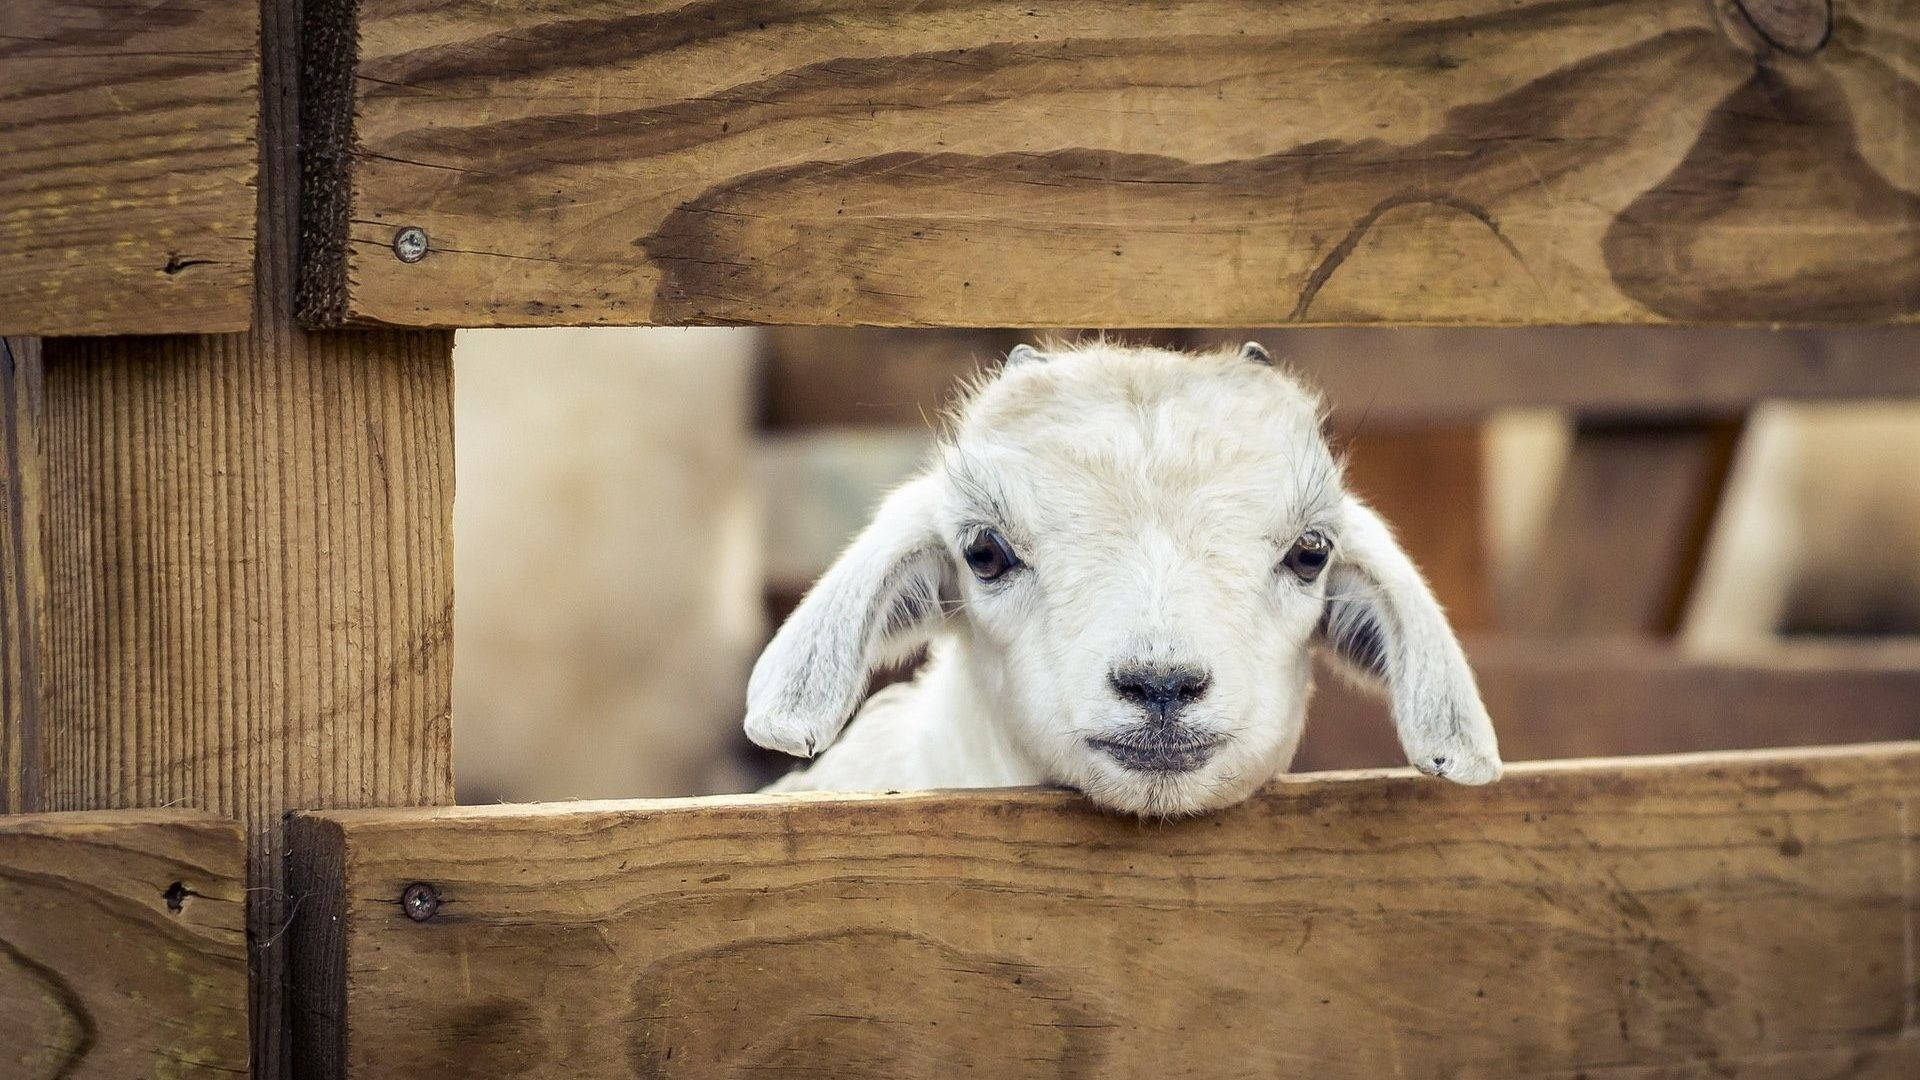 Baby Goat In Wooden Cage Wallpaper